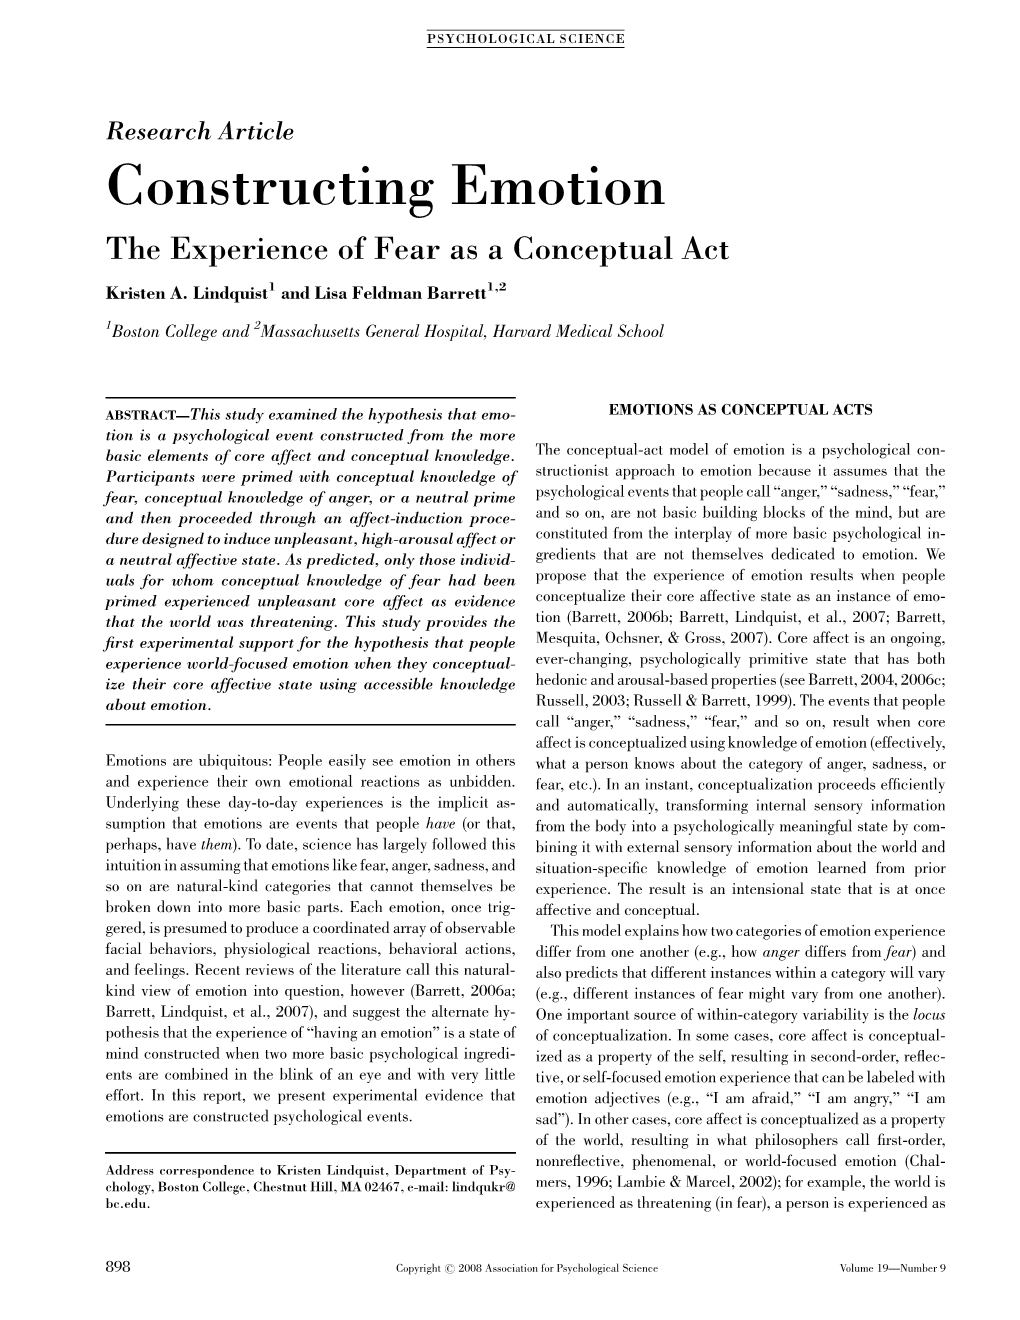 Constructing Emotion: the Experience of Fear As a Conceptual